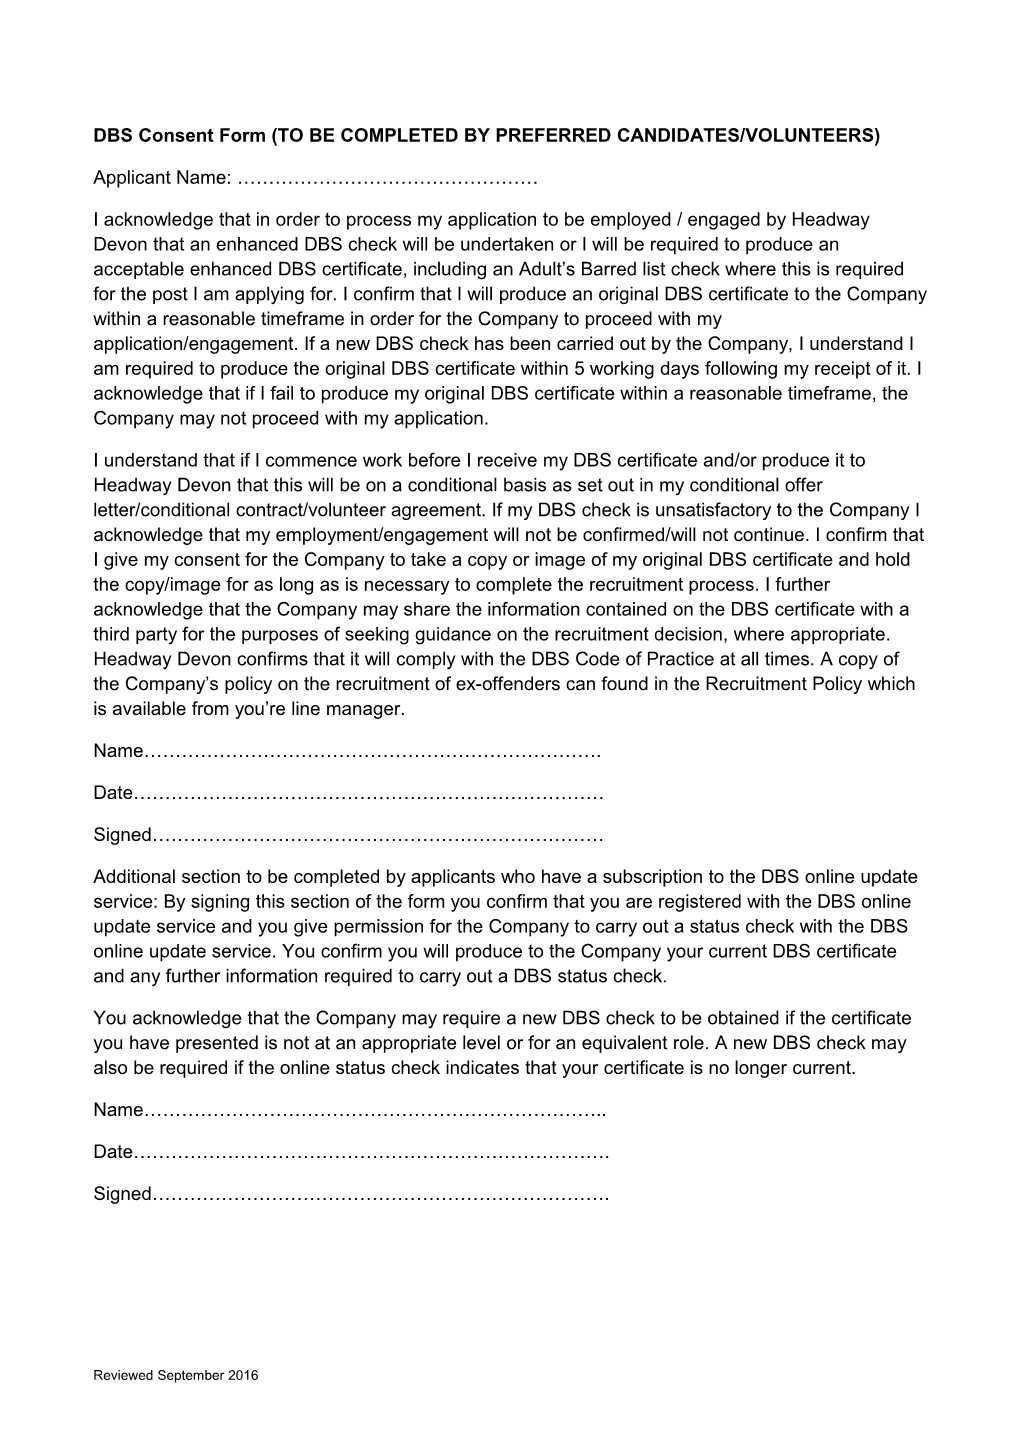 DBS Consent Form (TO BE COMPLETED by PREFERRED CANDIDATES/VOLUNTEERS)